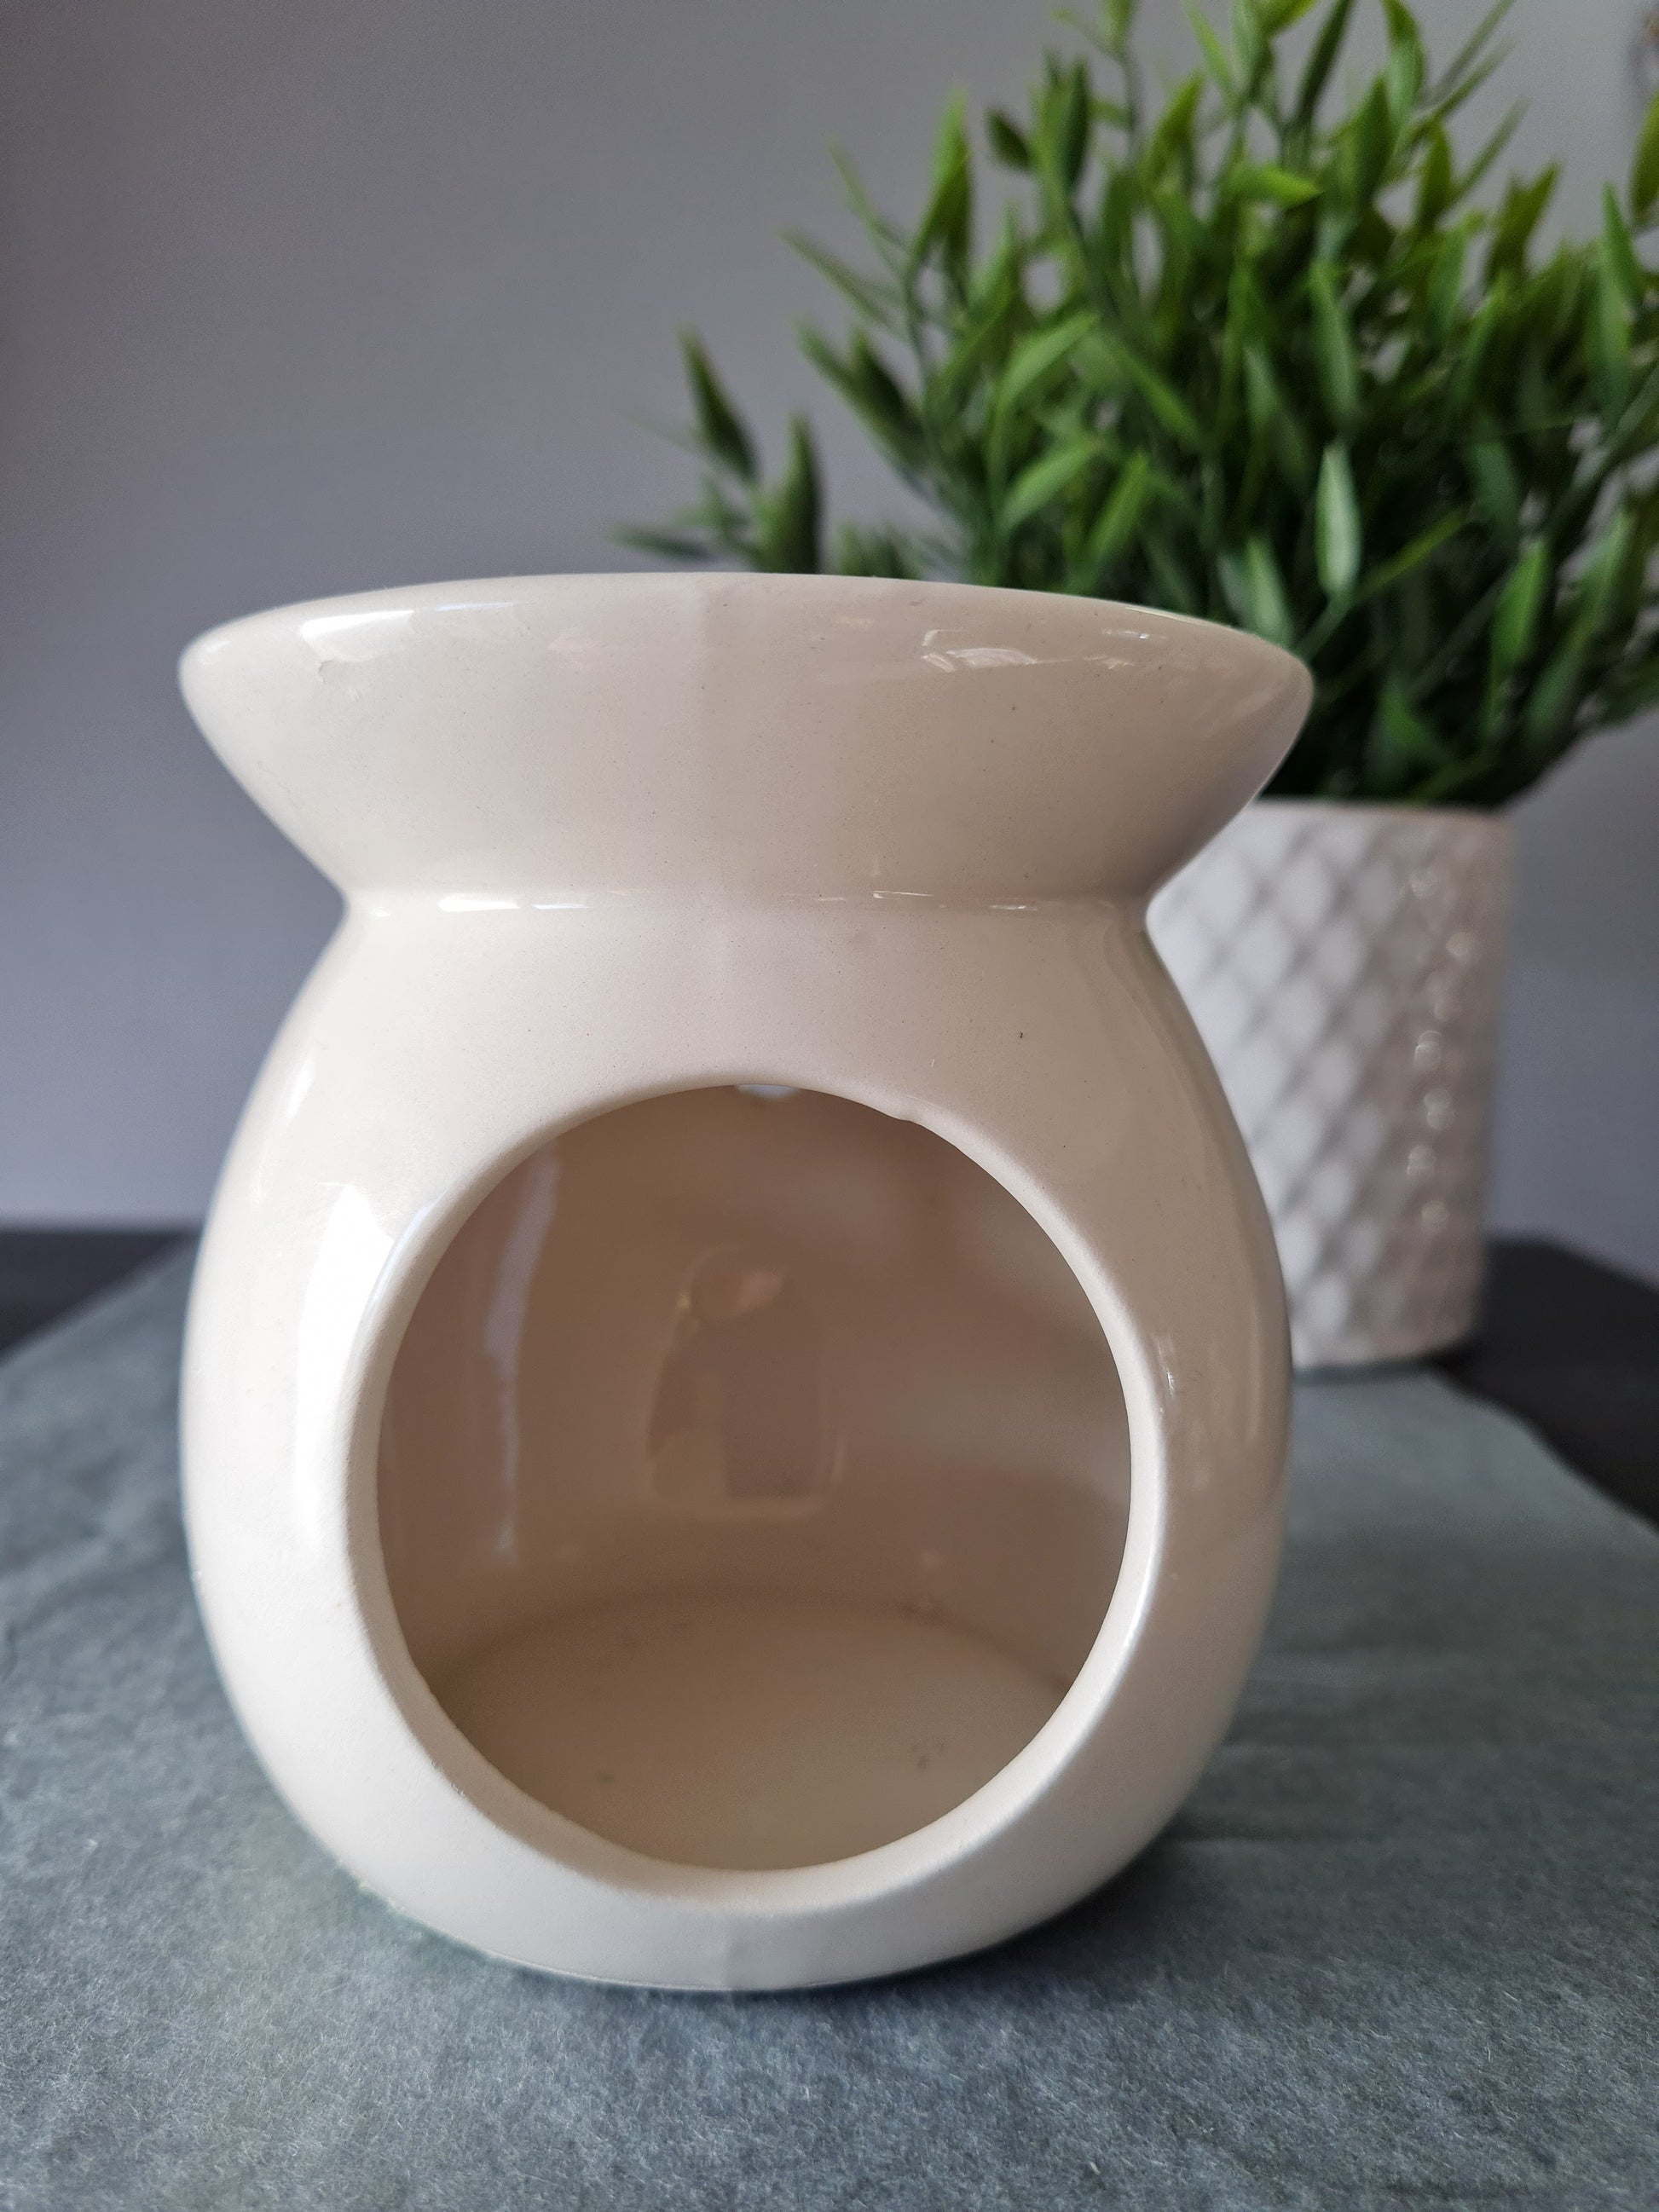 Sit back and breathe in a beautiful wax melt with the help of this stylish oil and wax burner. The simple design features a small dish, with a hollow and circular inside for the candle to be placed into. A minimalist white colour that will complement any other room decor. Discover our stunning range of wax melts here!